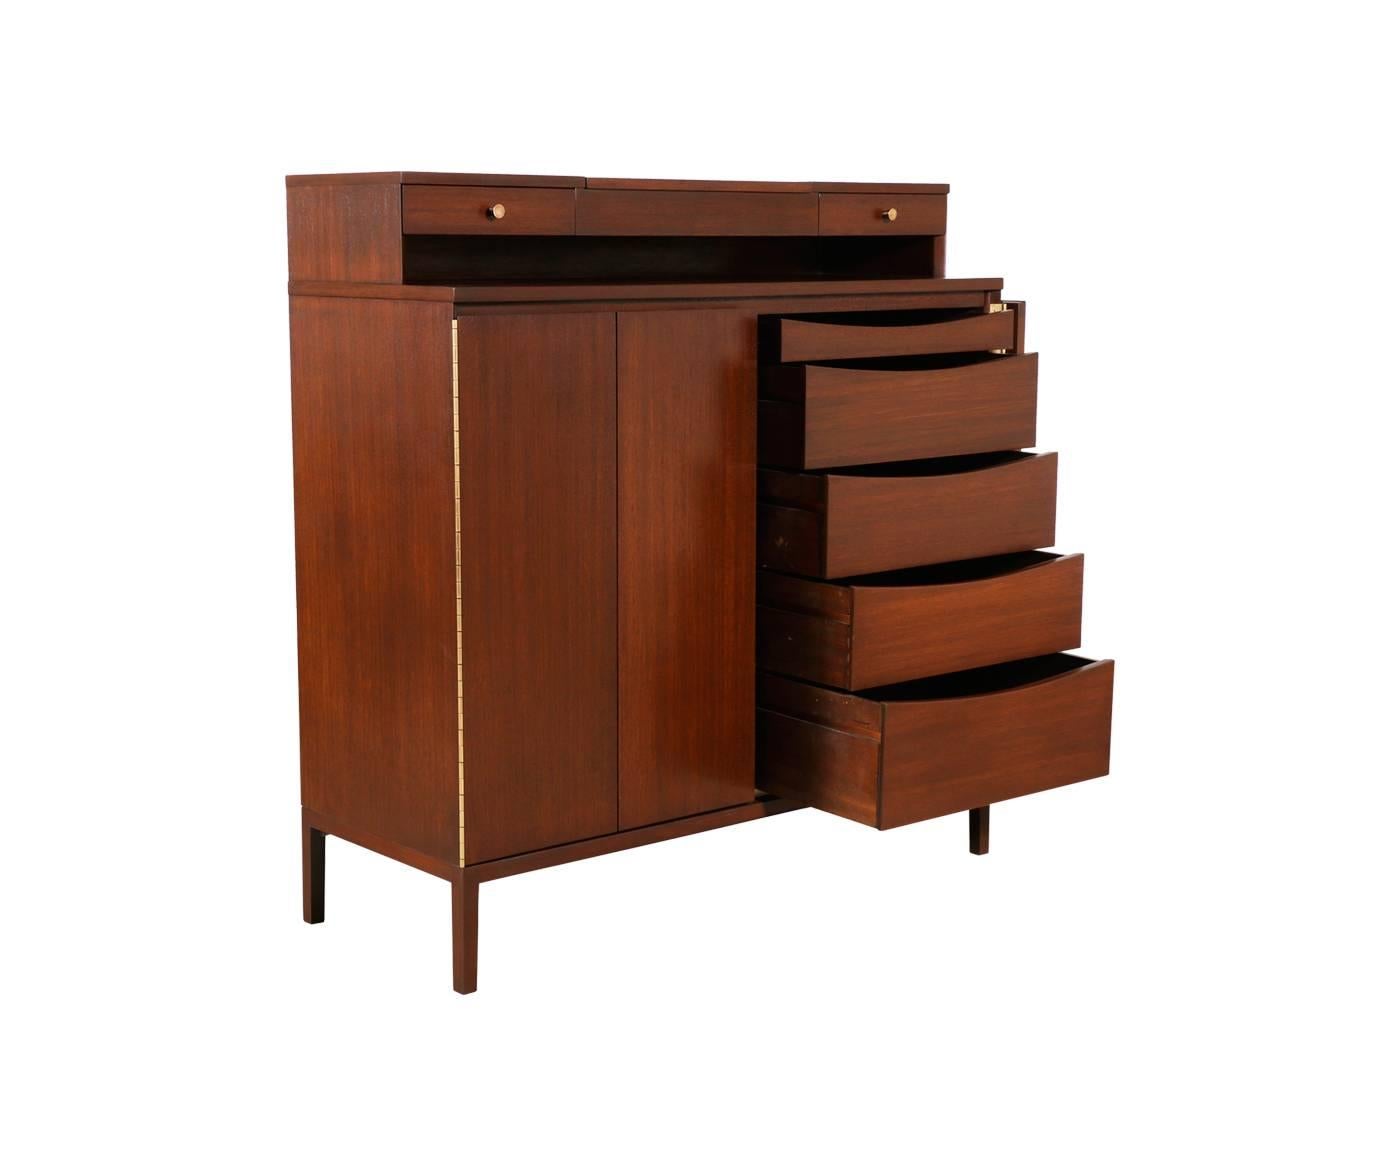 Polished Paul McCobb “Irwin Collection” Batchelors Chest with Bi-Folding Doors for Calvin